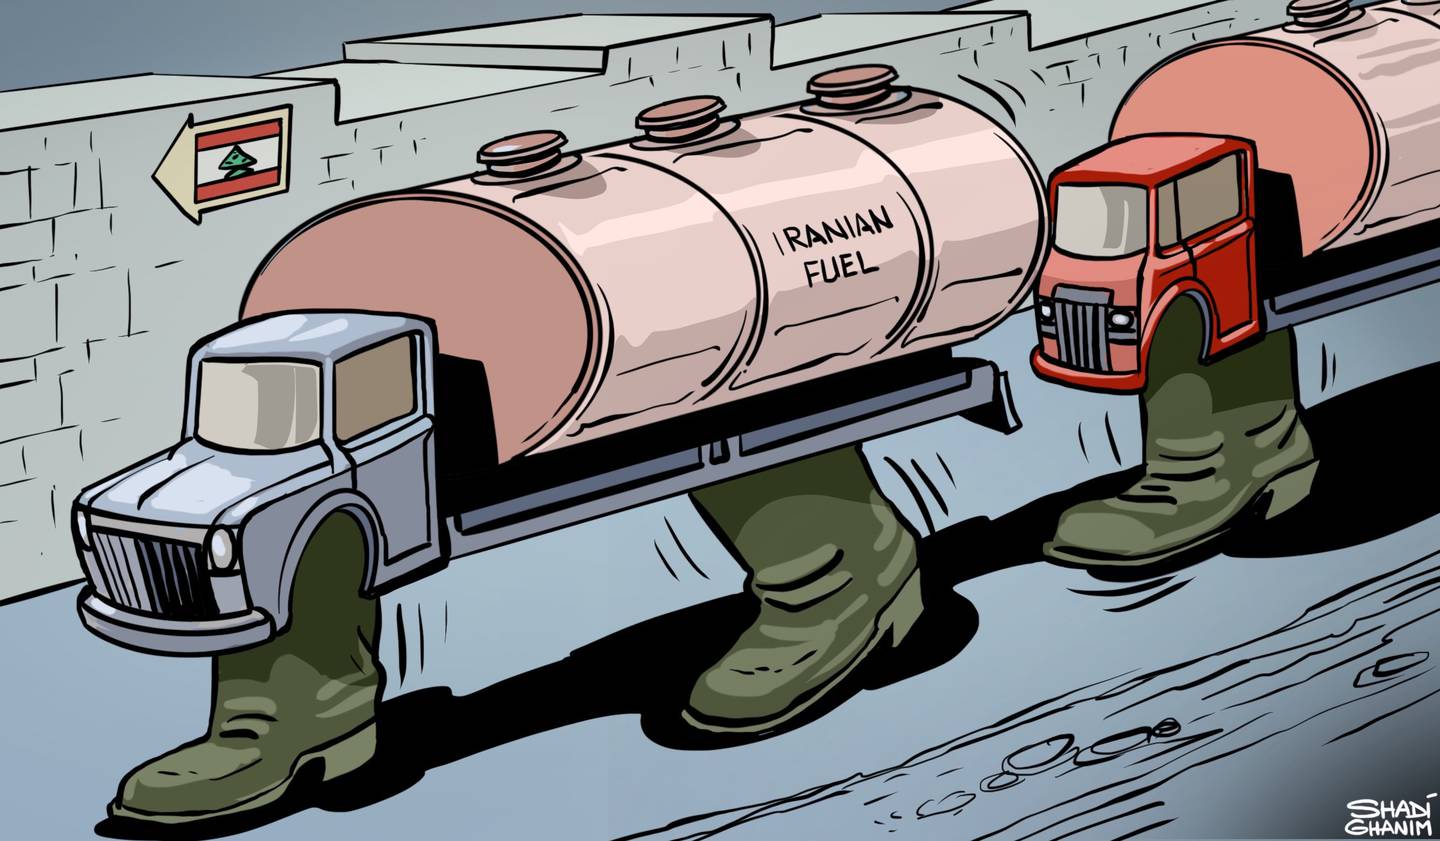 Our cartoonist's take on Iranian fuel being transported to Lebanon by Hezbollah